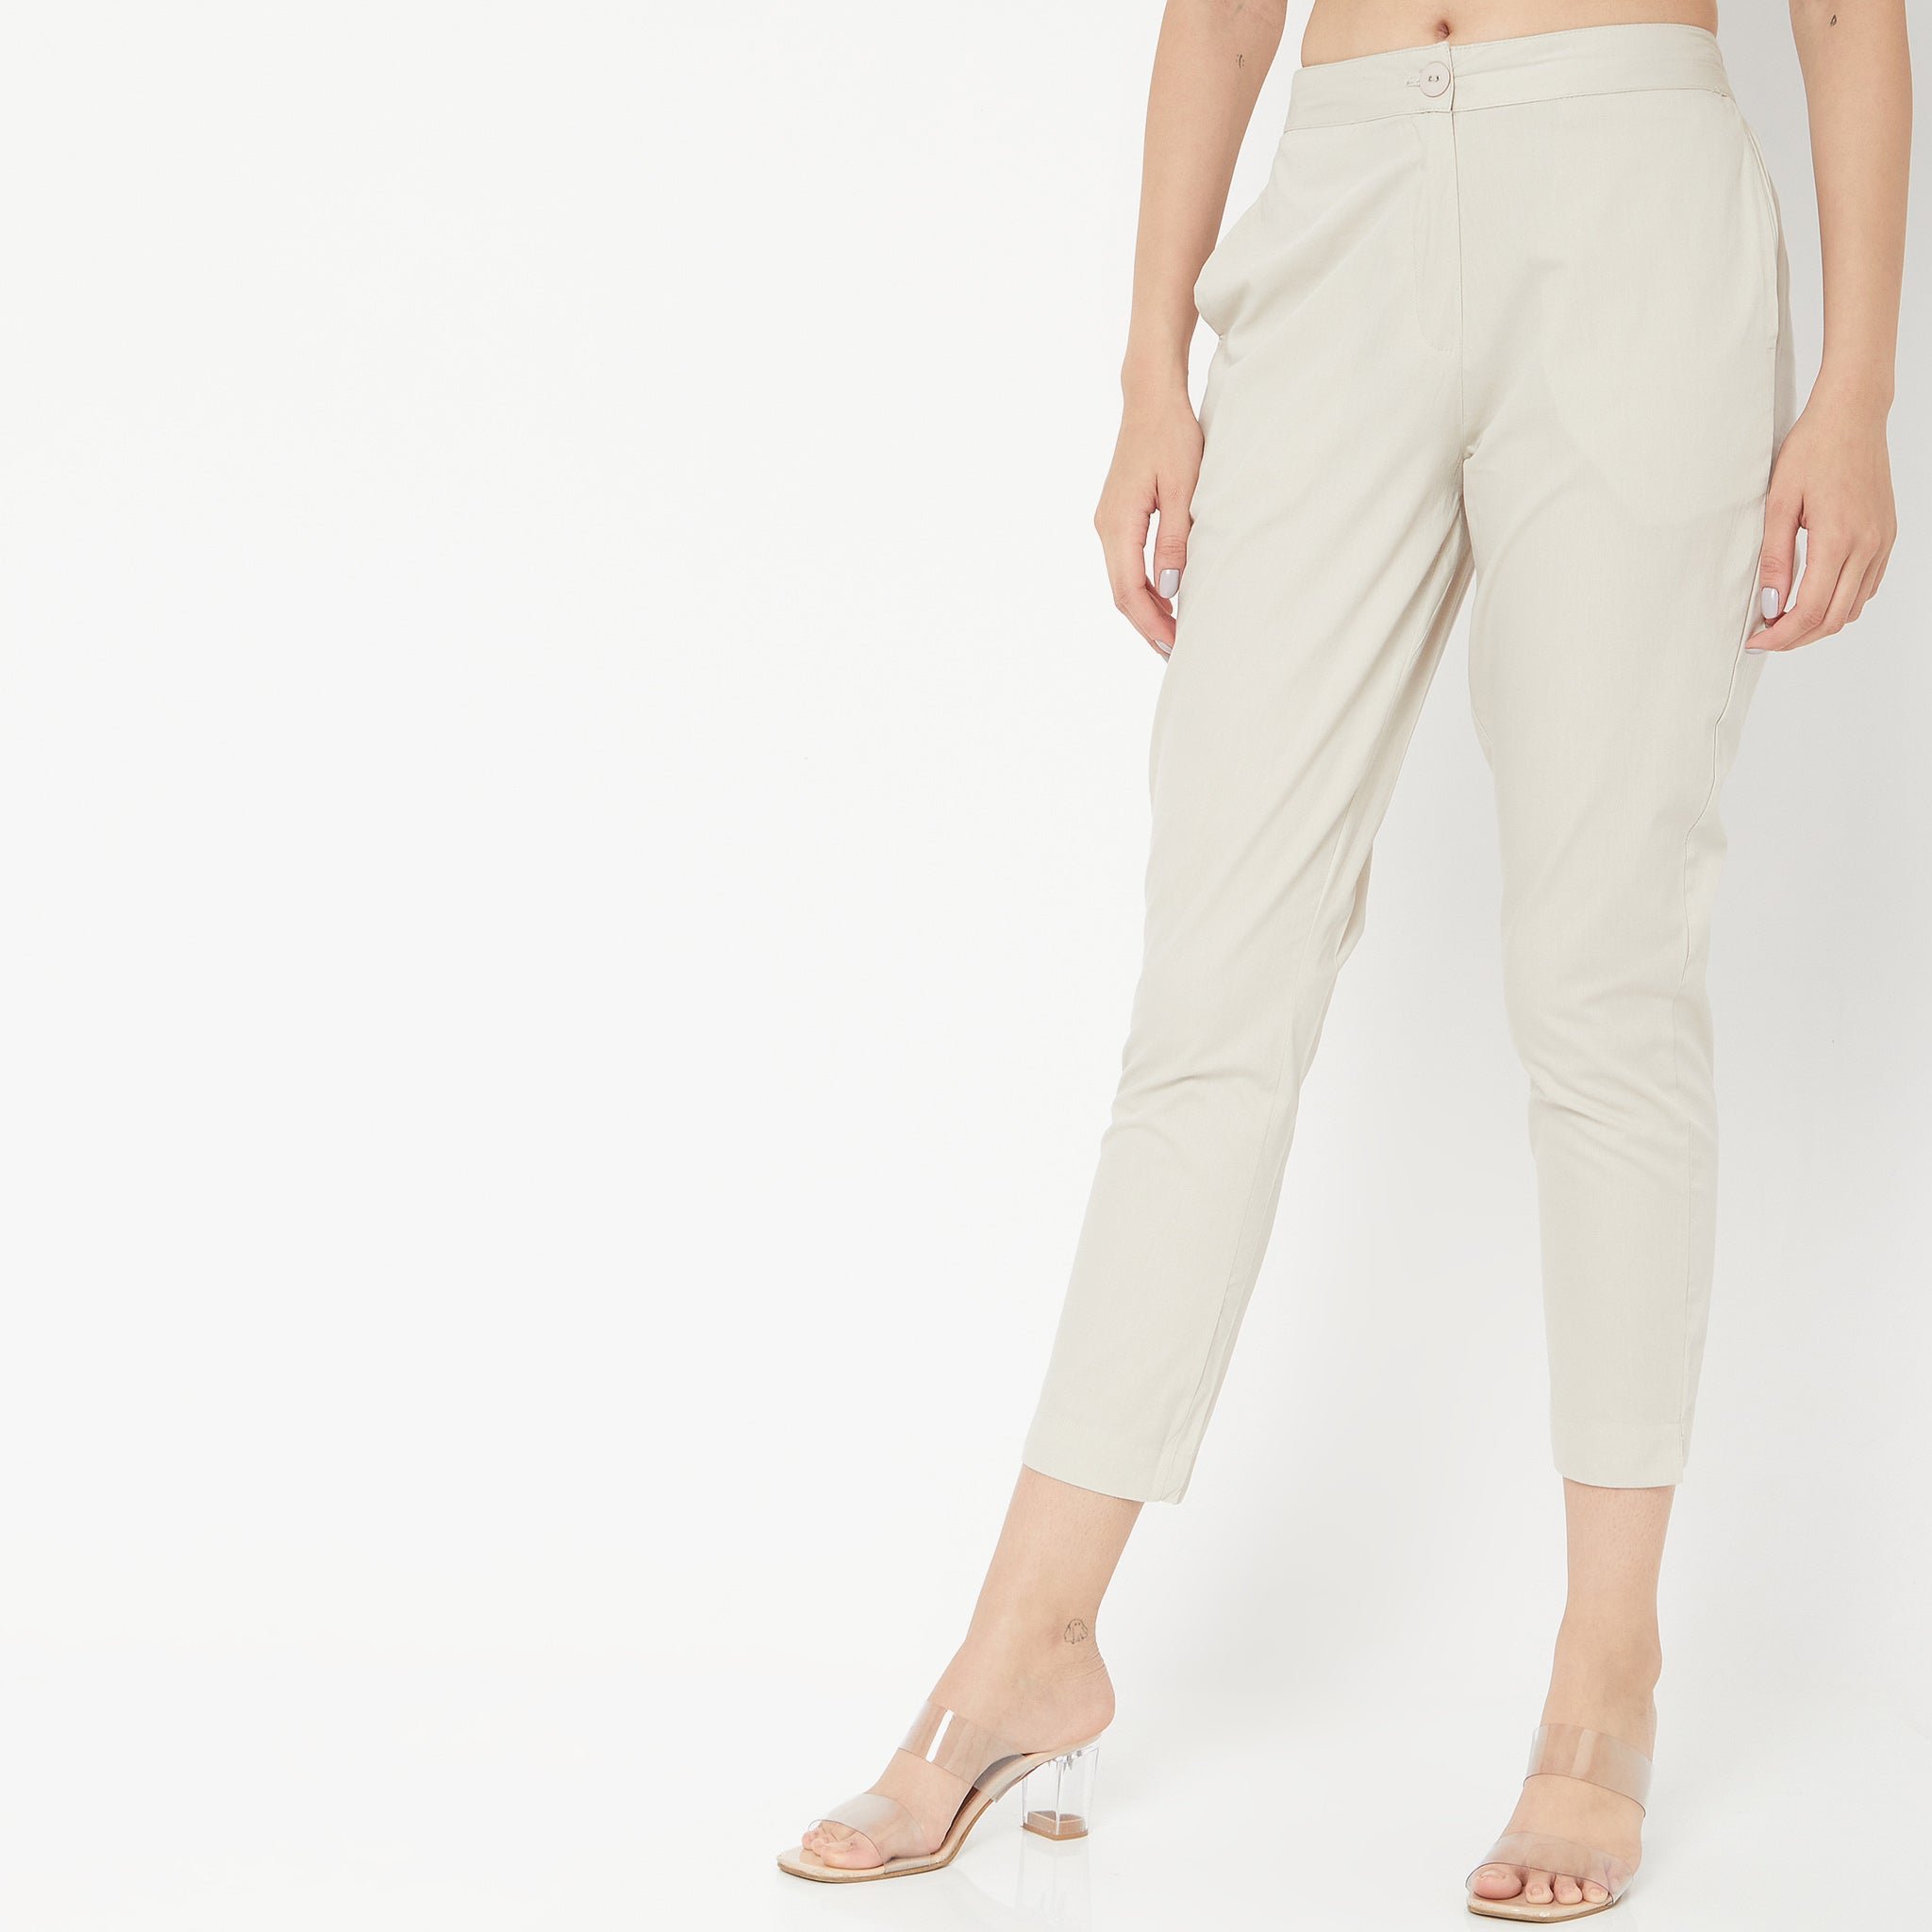 Slim Fit Solid Mid Rise Pants